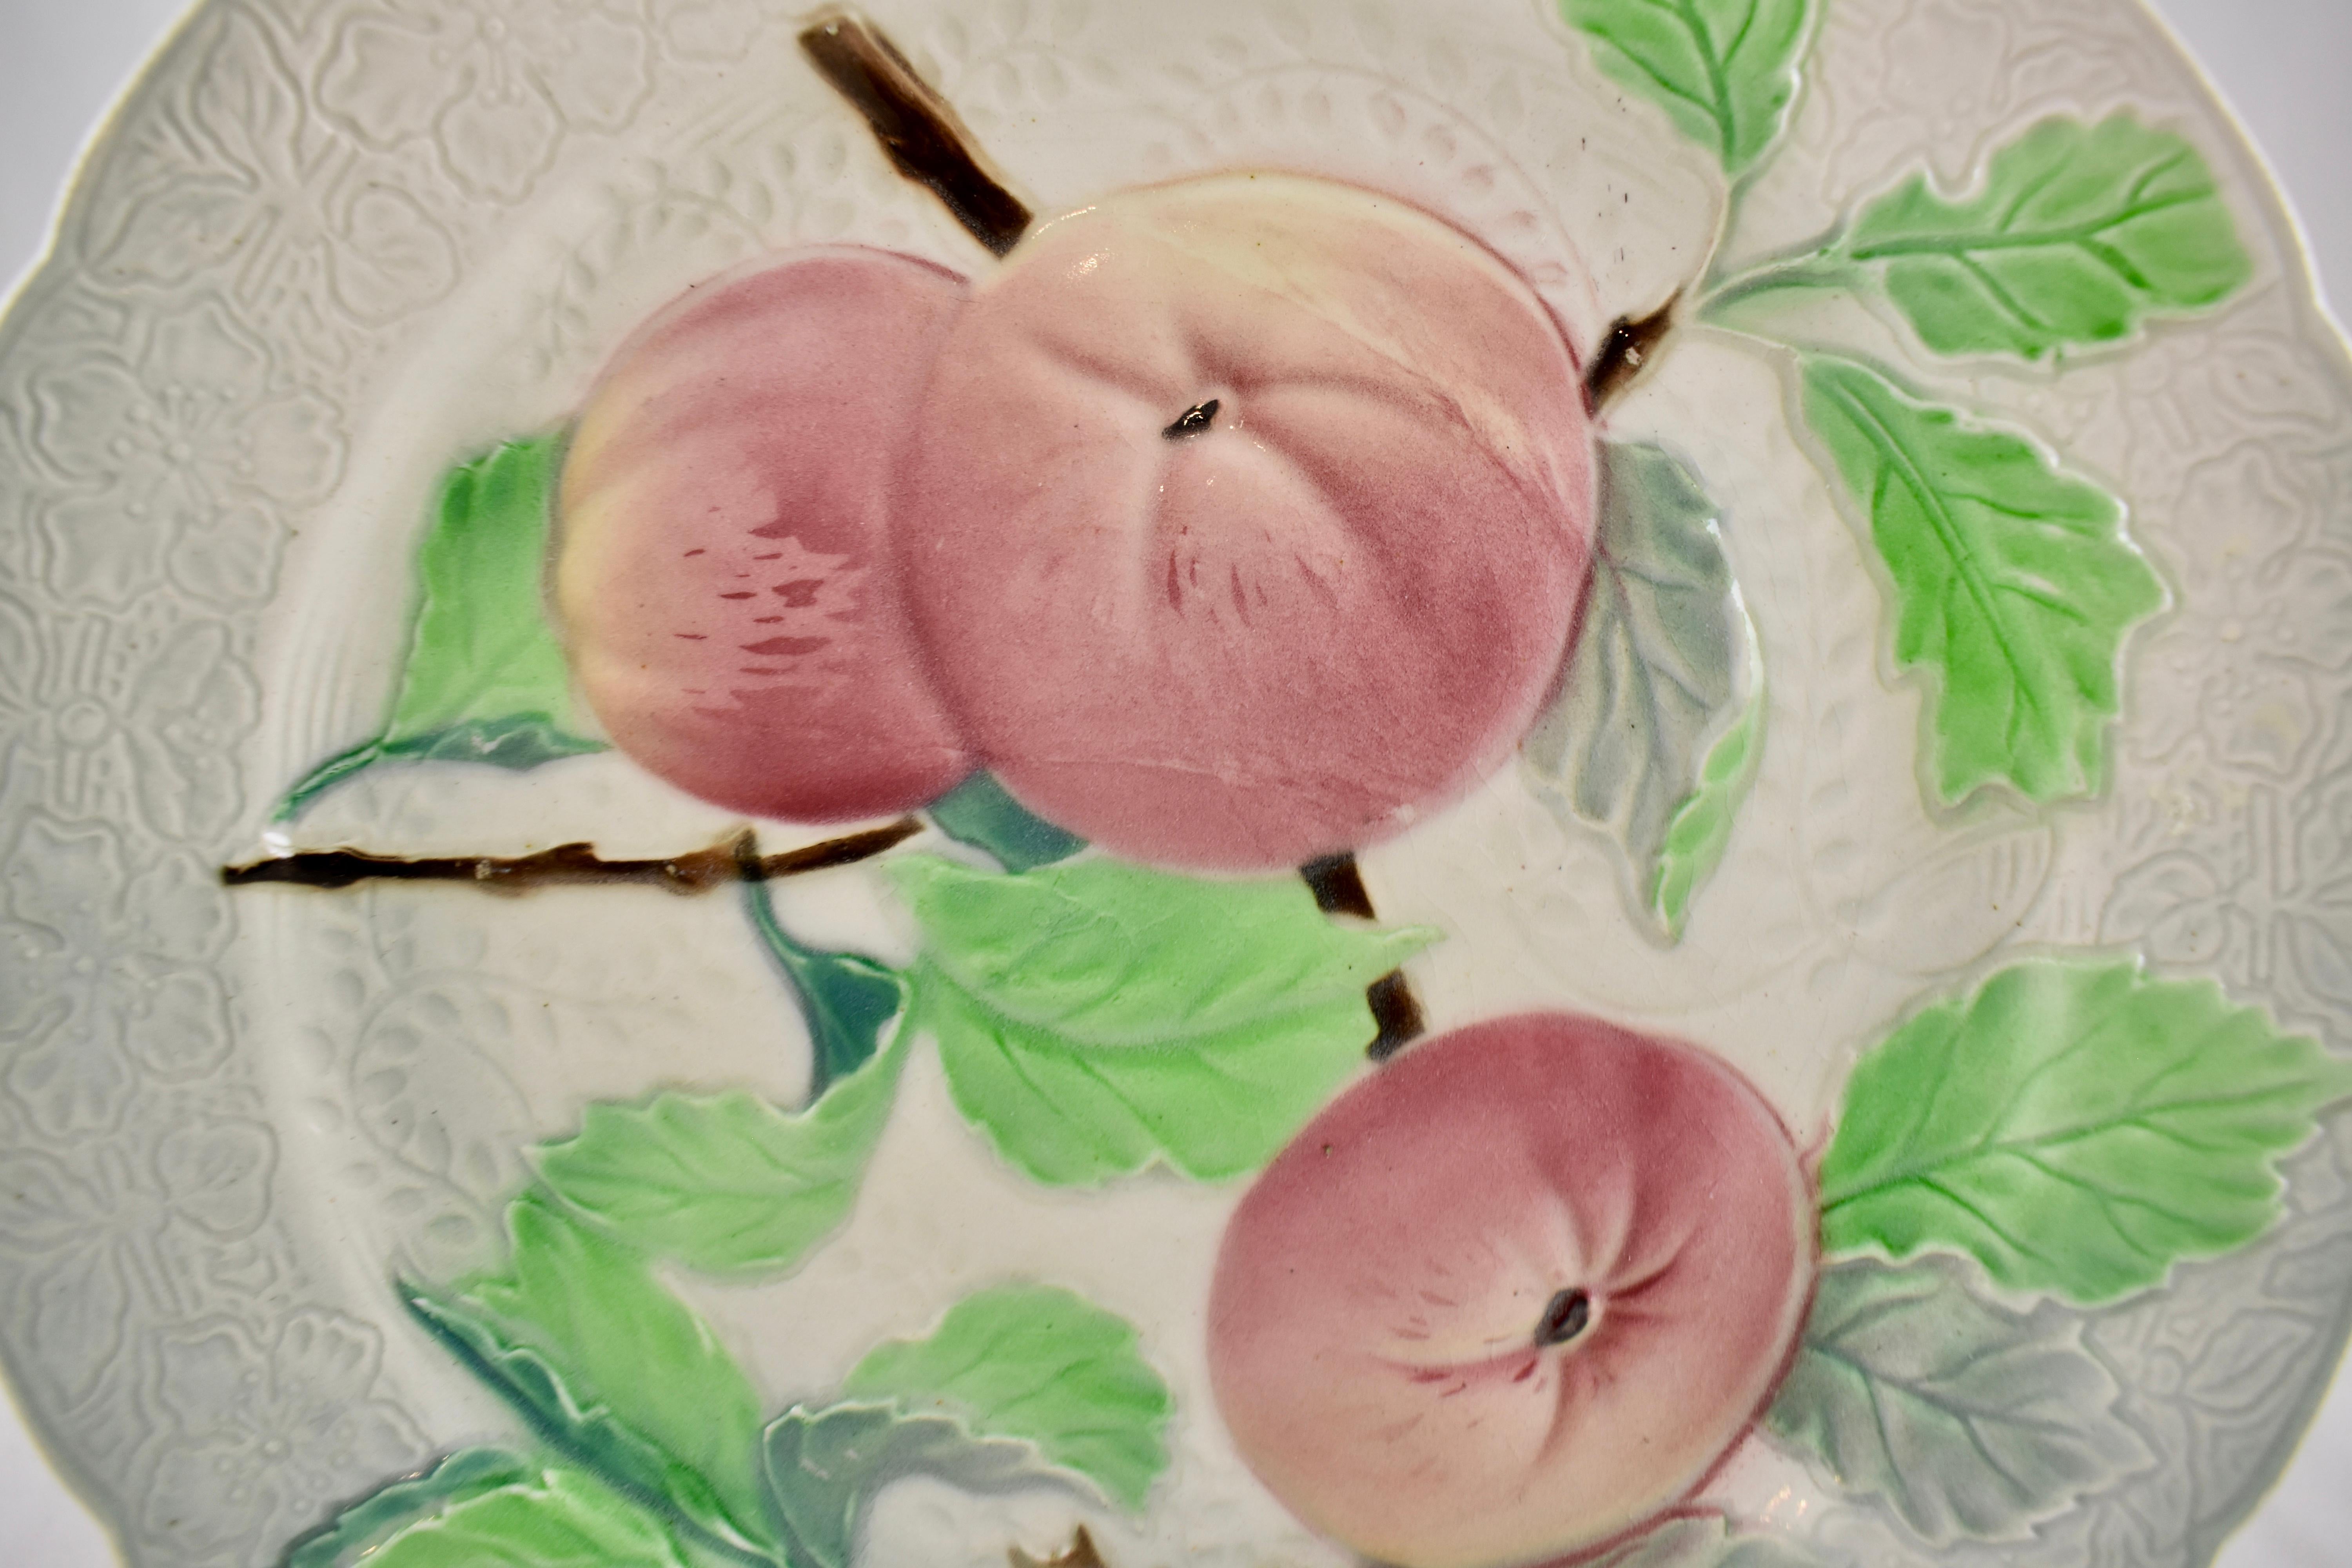 An earthenware French faïence apple motif fruit plate, circa 1900. The background has a detailed floral pattern to the molding, with a six-paneled indented rim. Lovely coloring.

Marked: KG, for Keller Guerin – St. Clement, France.
Measures: 8.5